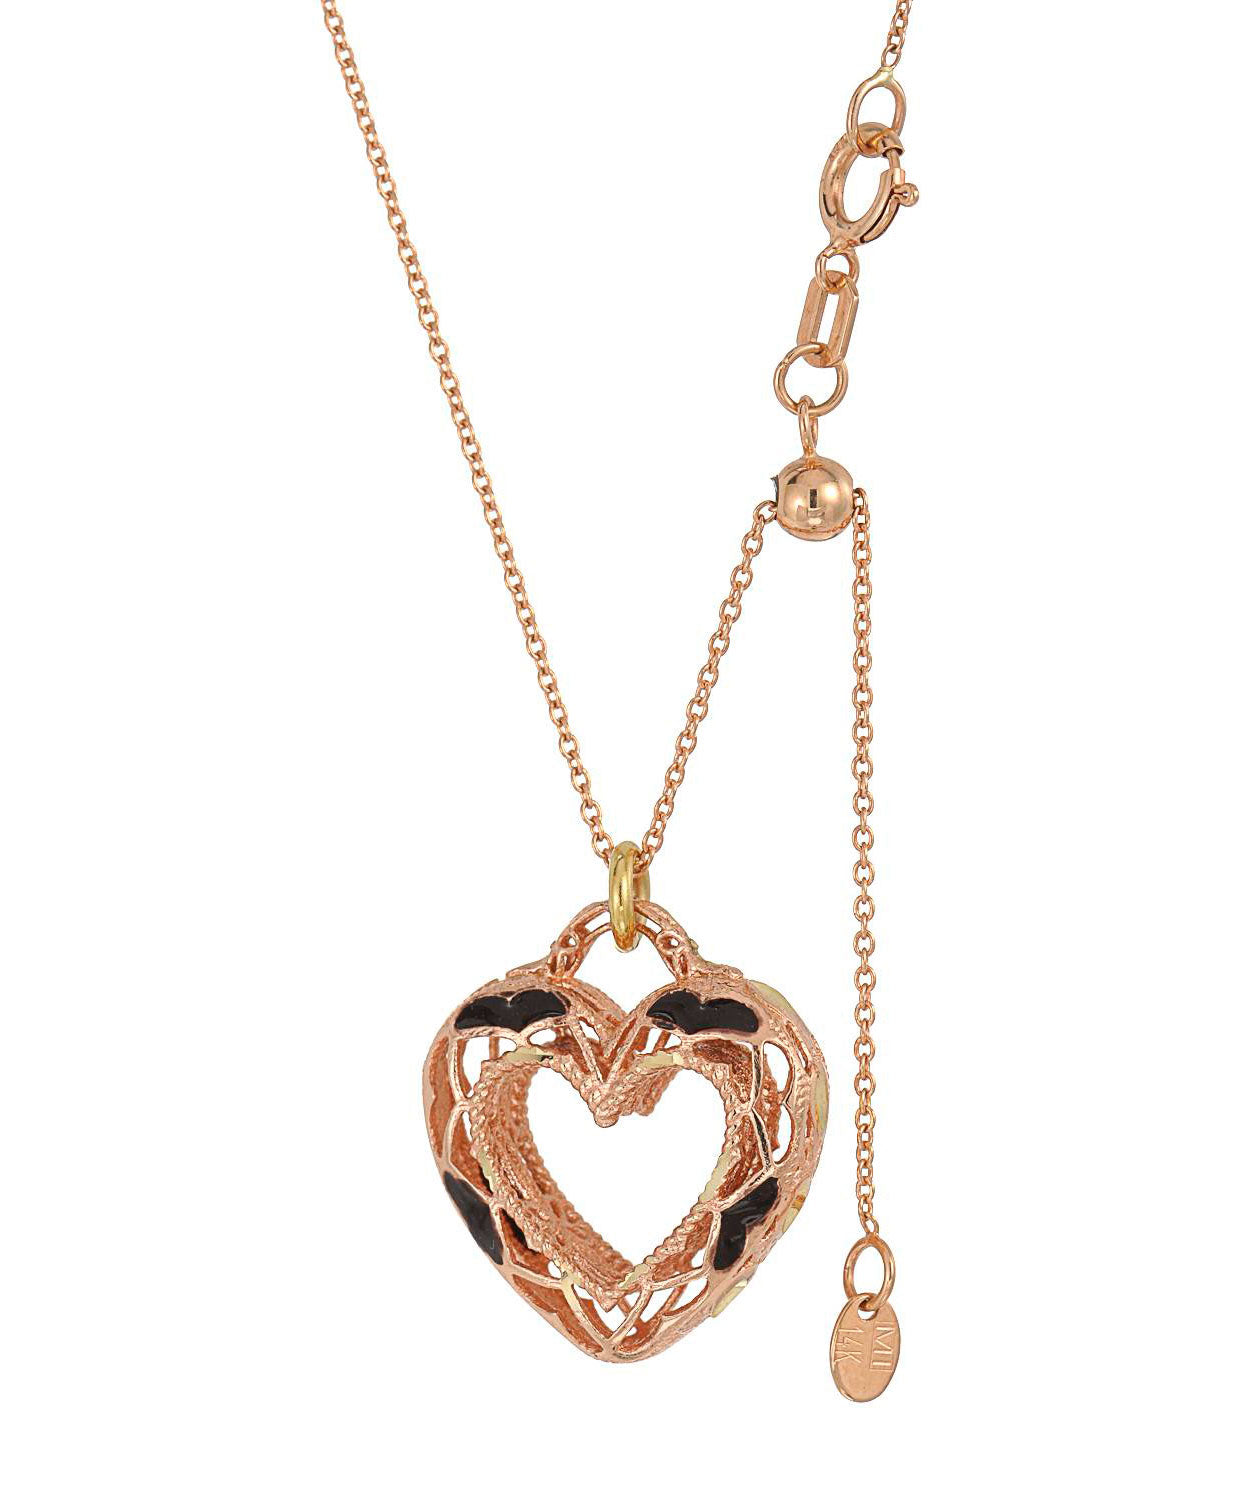 14k Rose Gold & Black Enamel Heart Pendant With Chain View 2